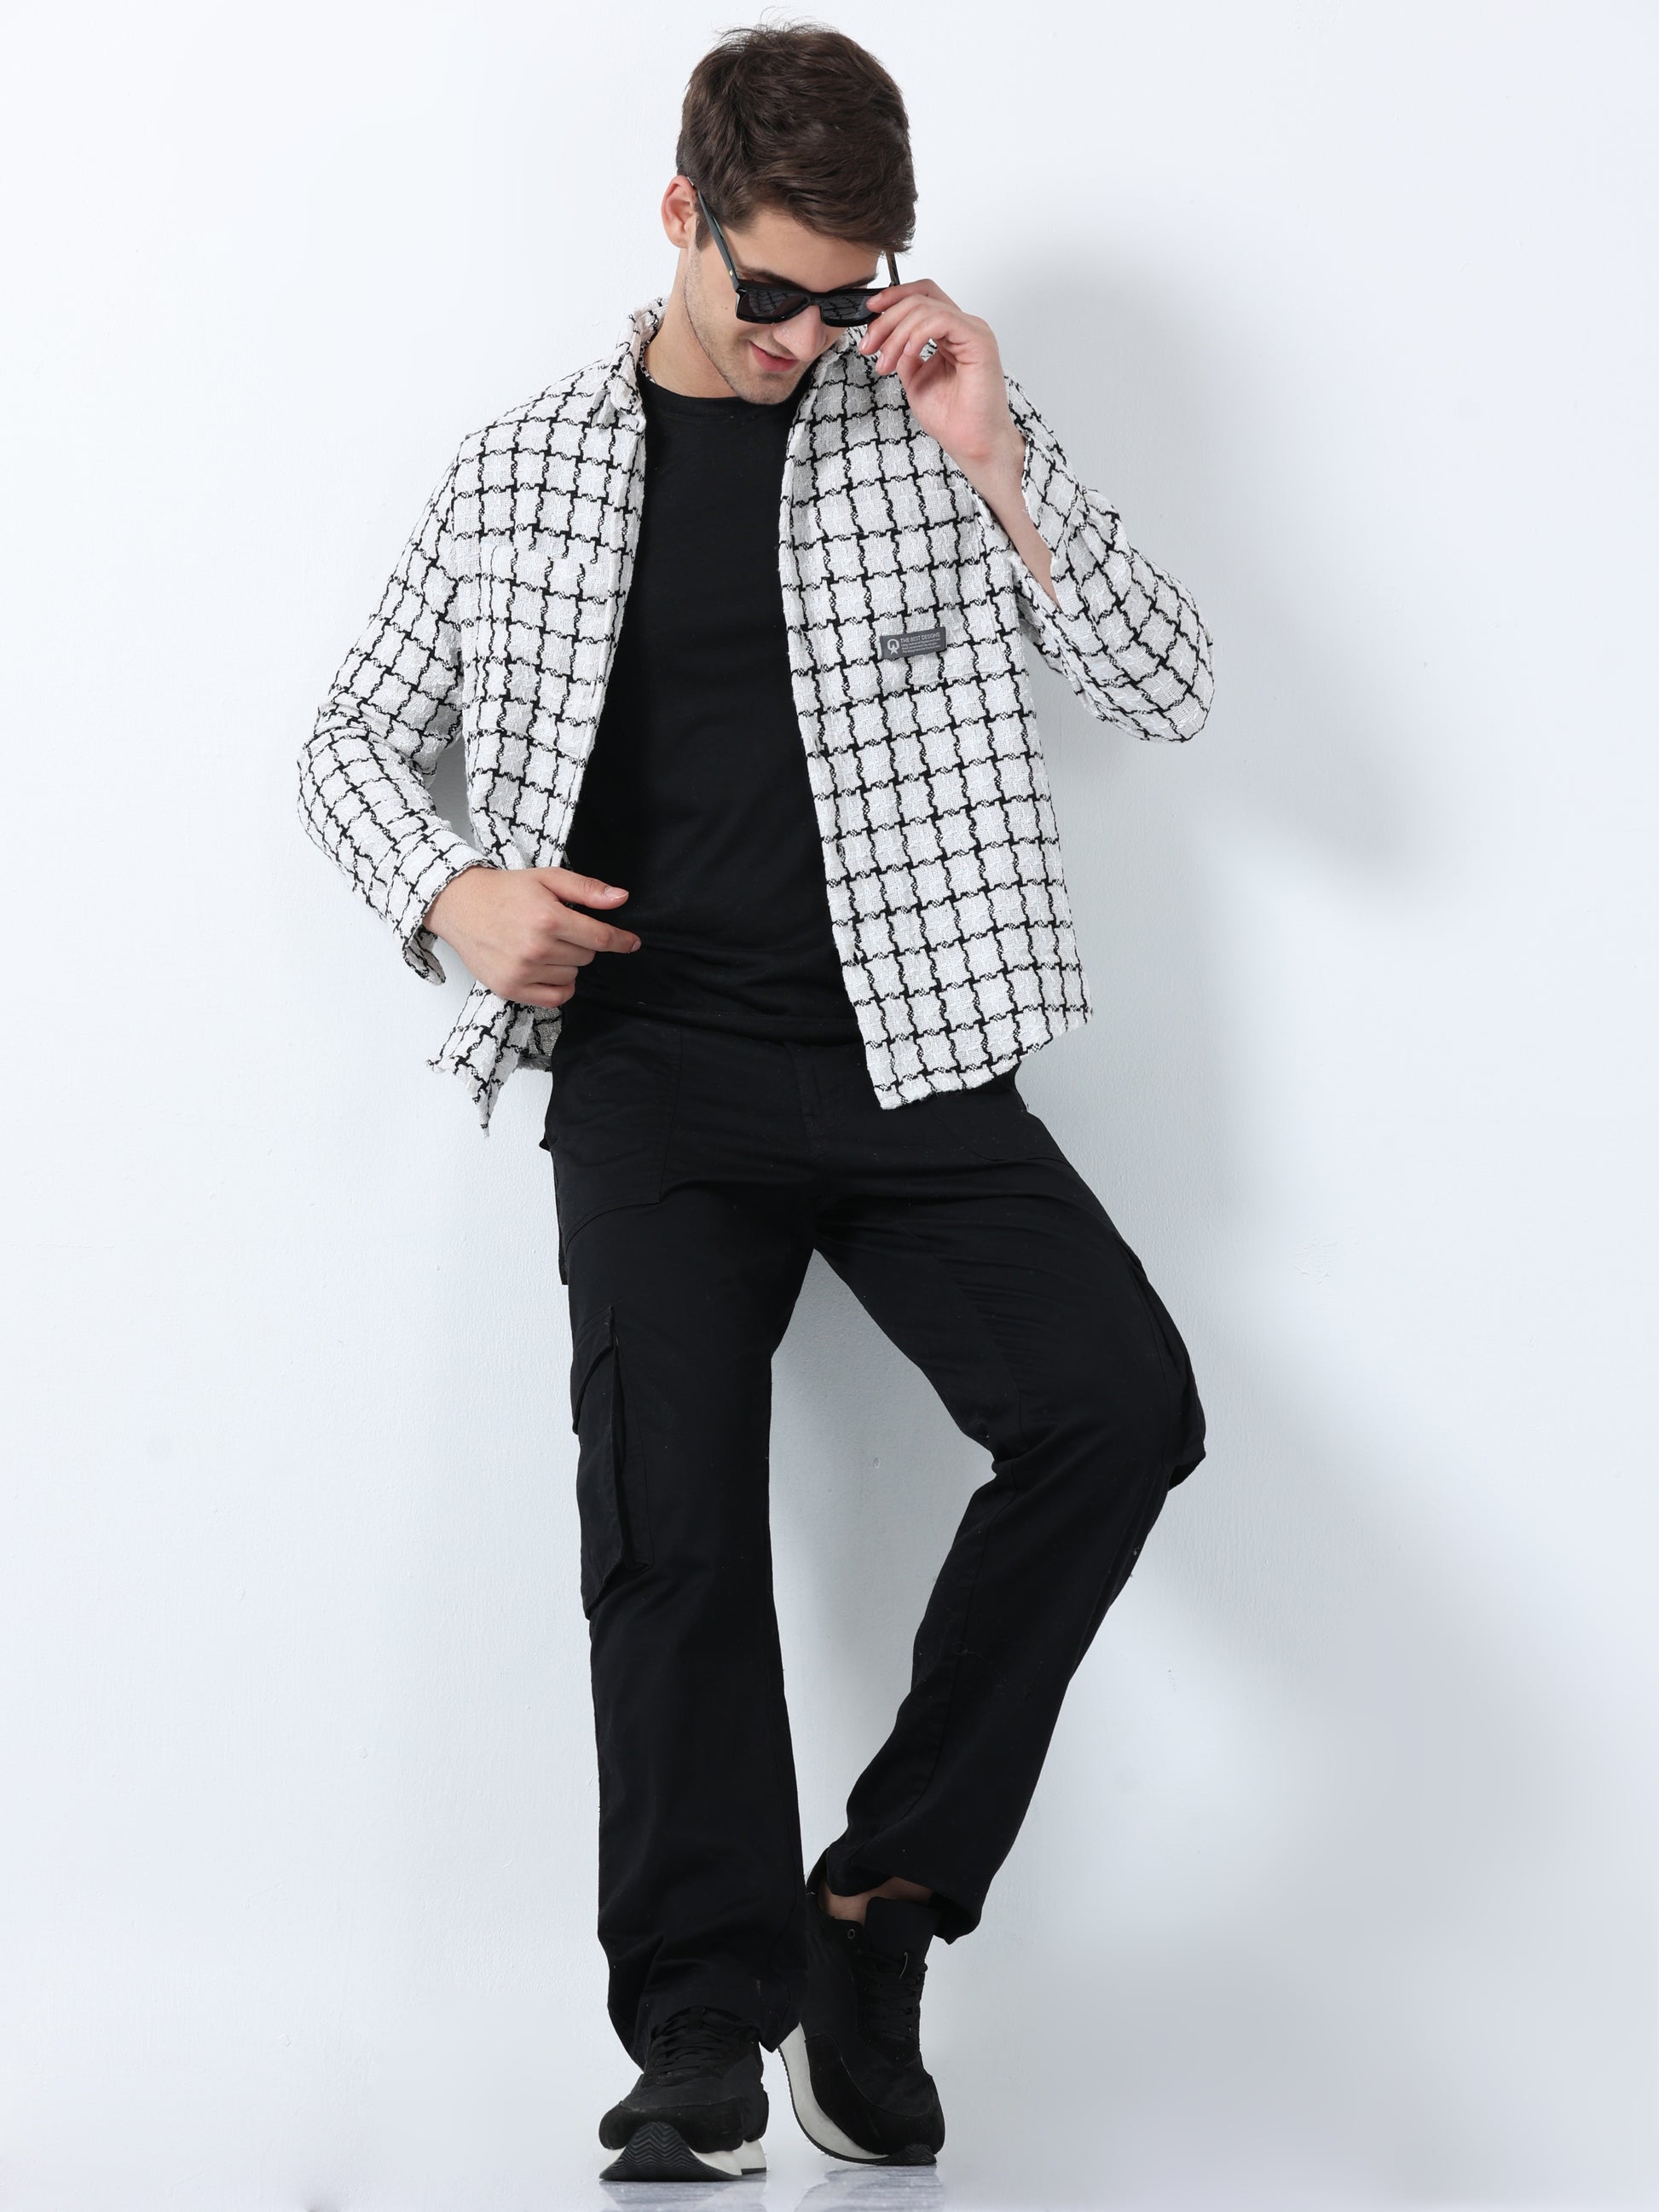 White Imported Fabric Graph Style Full Sleeve Checked shirt